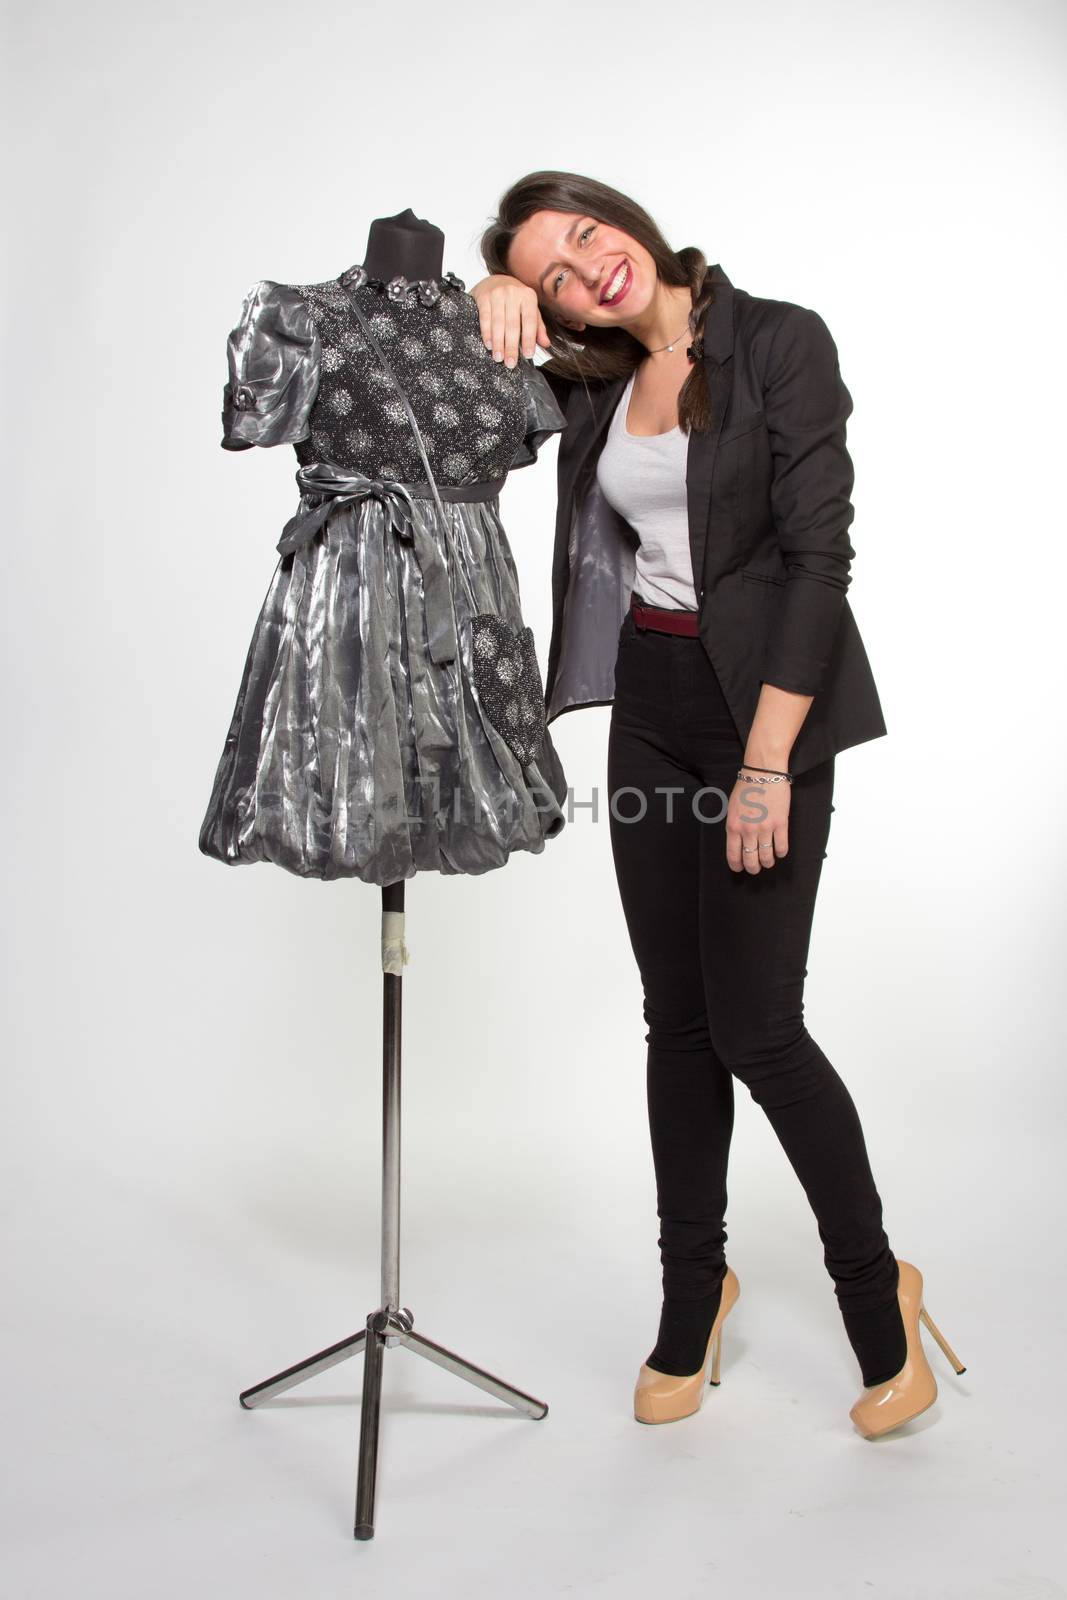 Woman with mannequin by gsdonlin